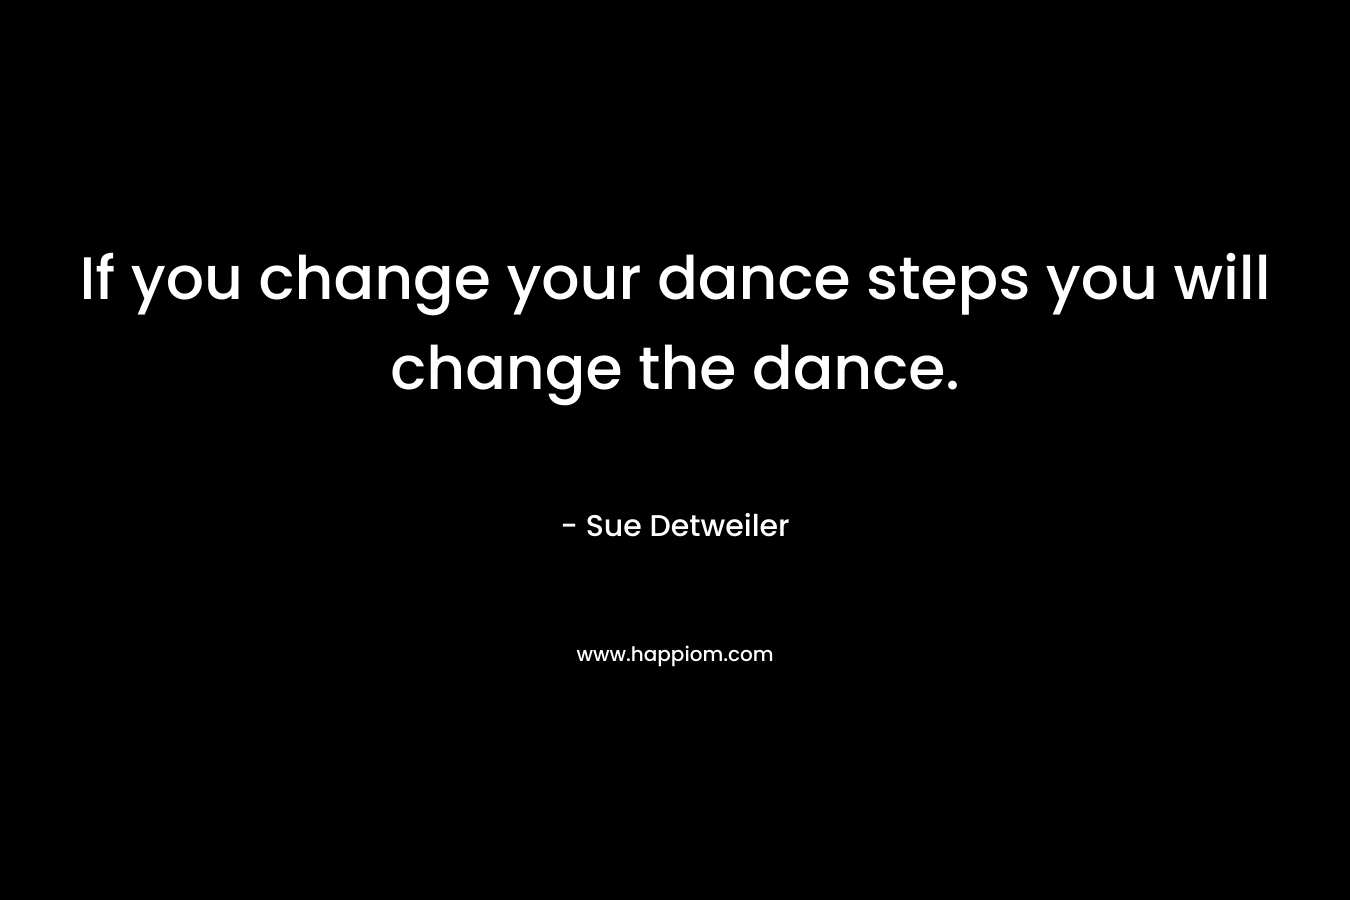 If you change your dance steps you will change the dance.